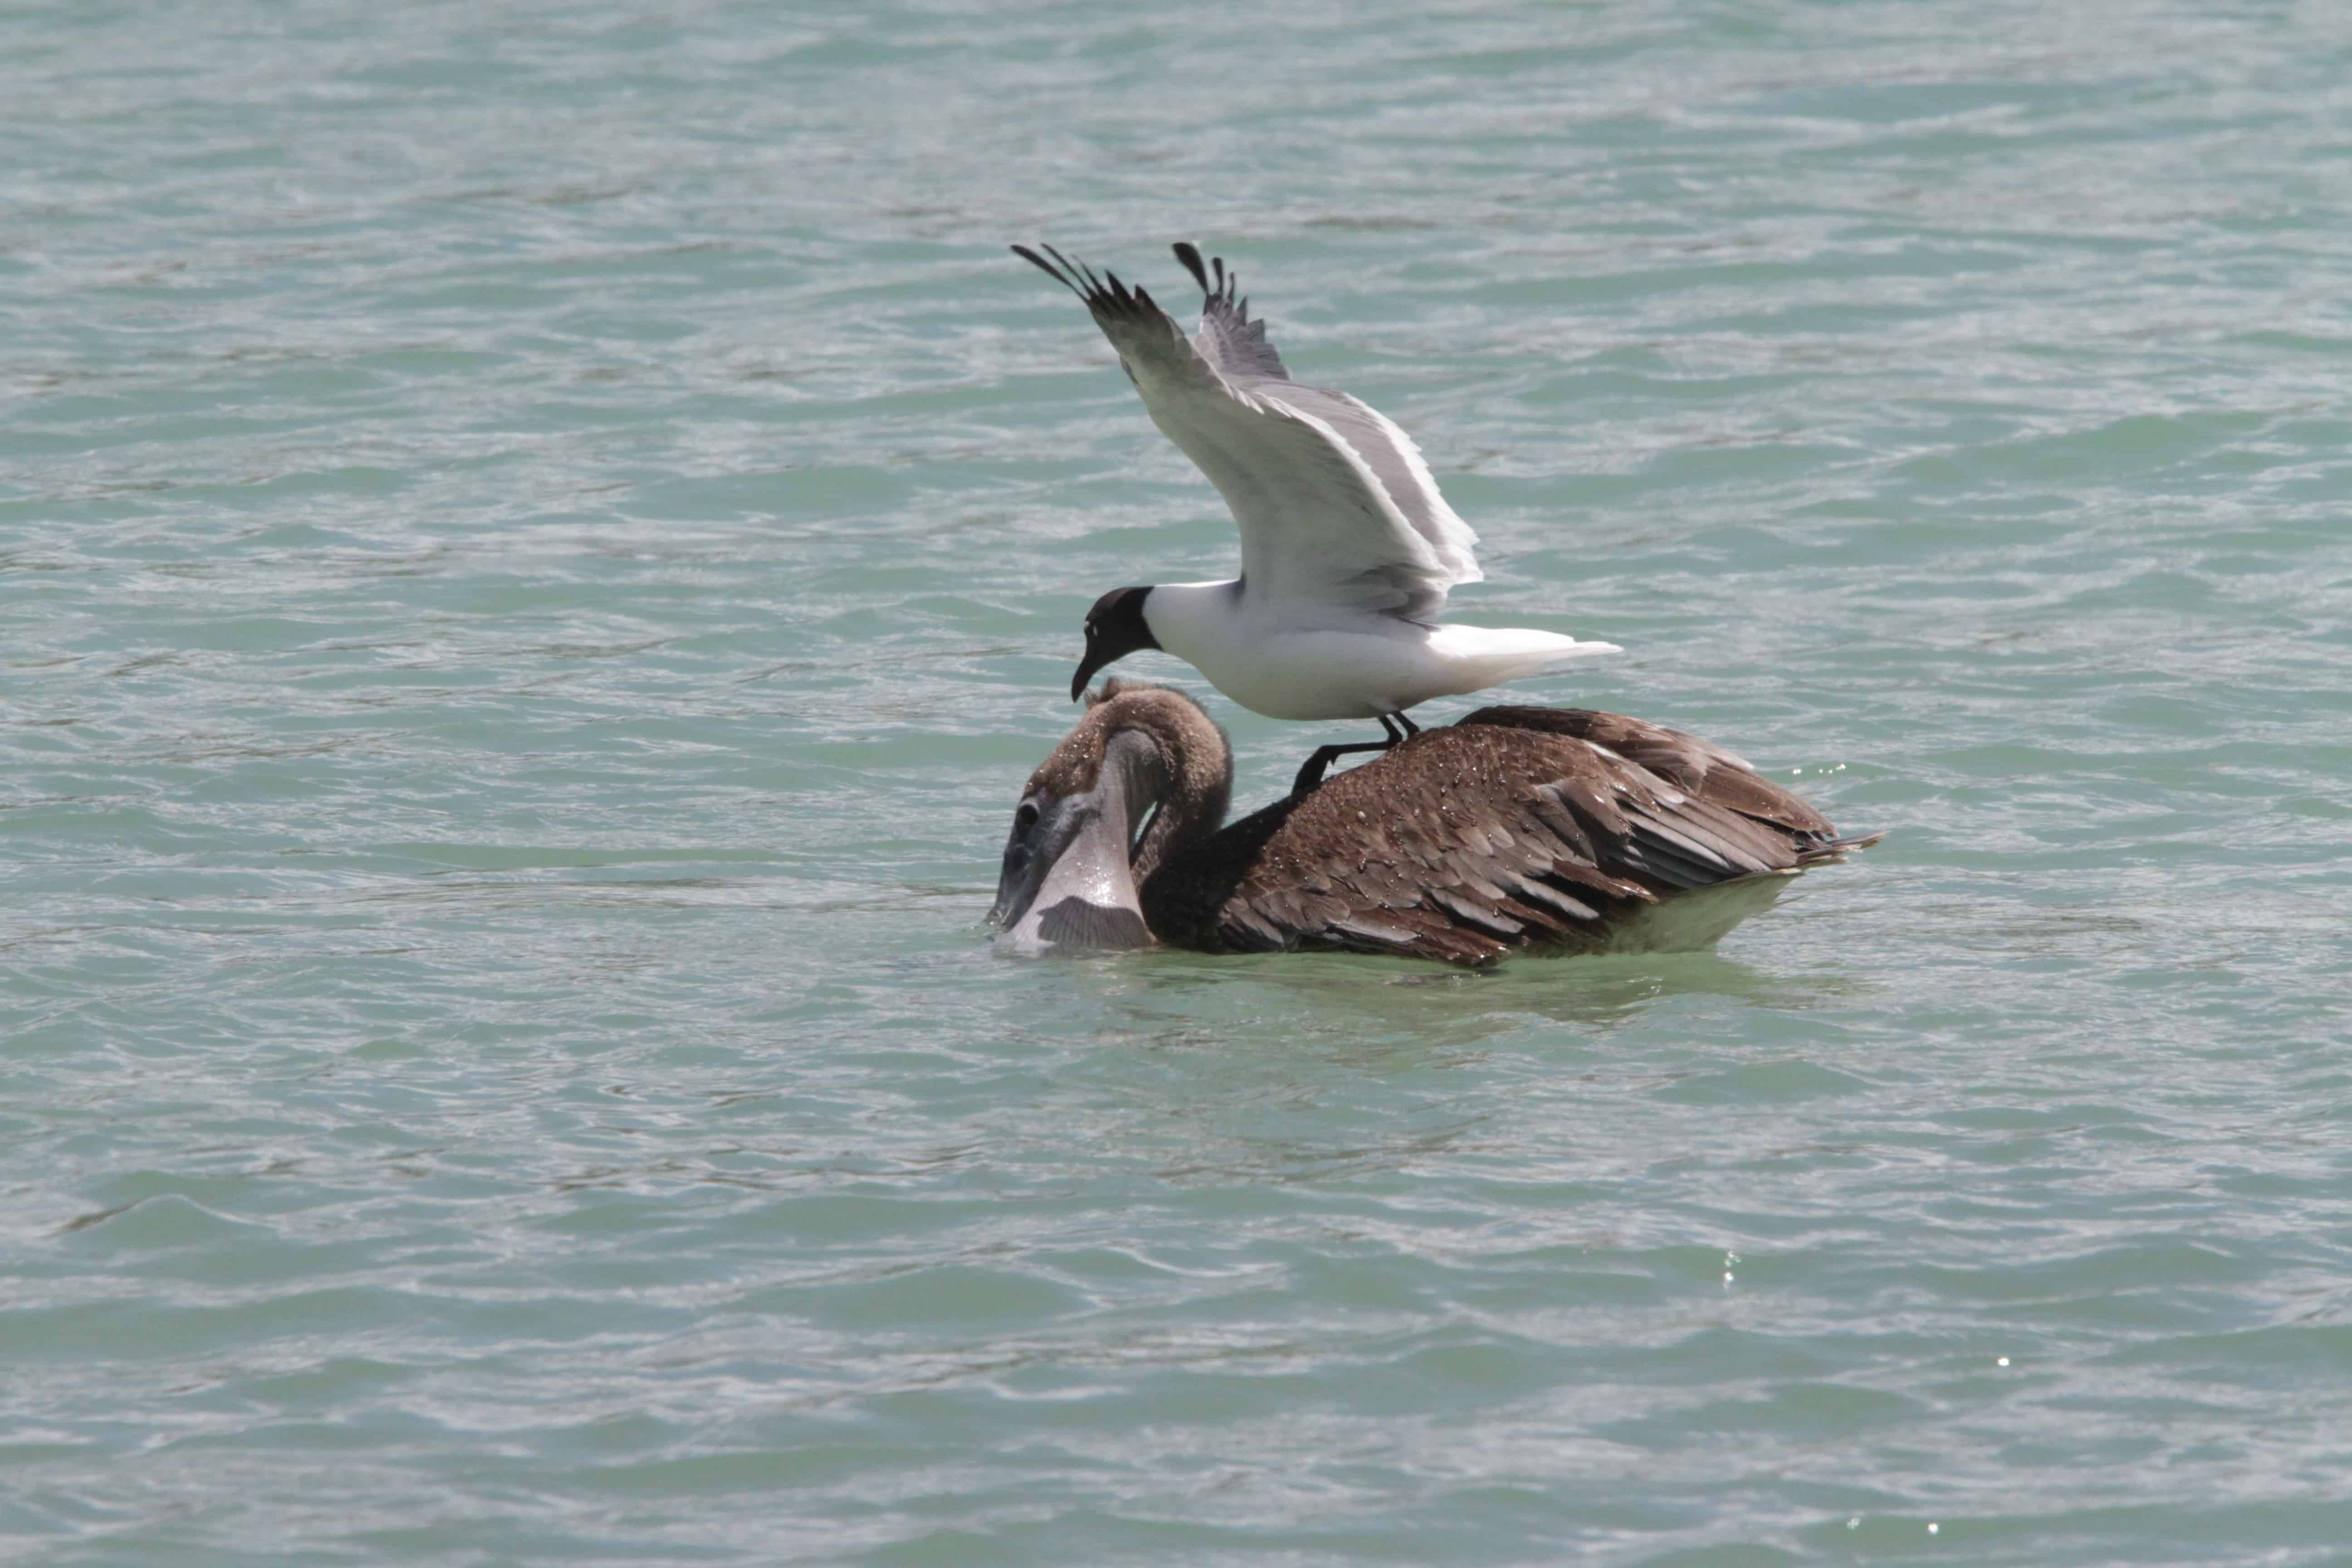 Laughing gull attempts to steal some of pelican's catch. Copyright: Dr Mike Pienkowski